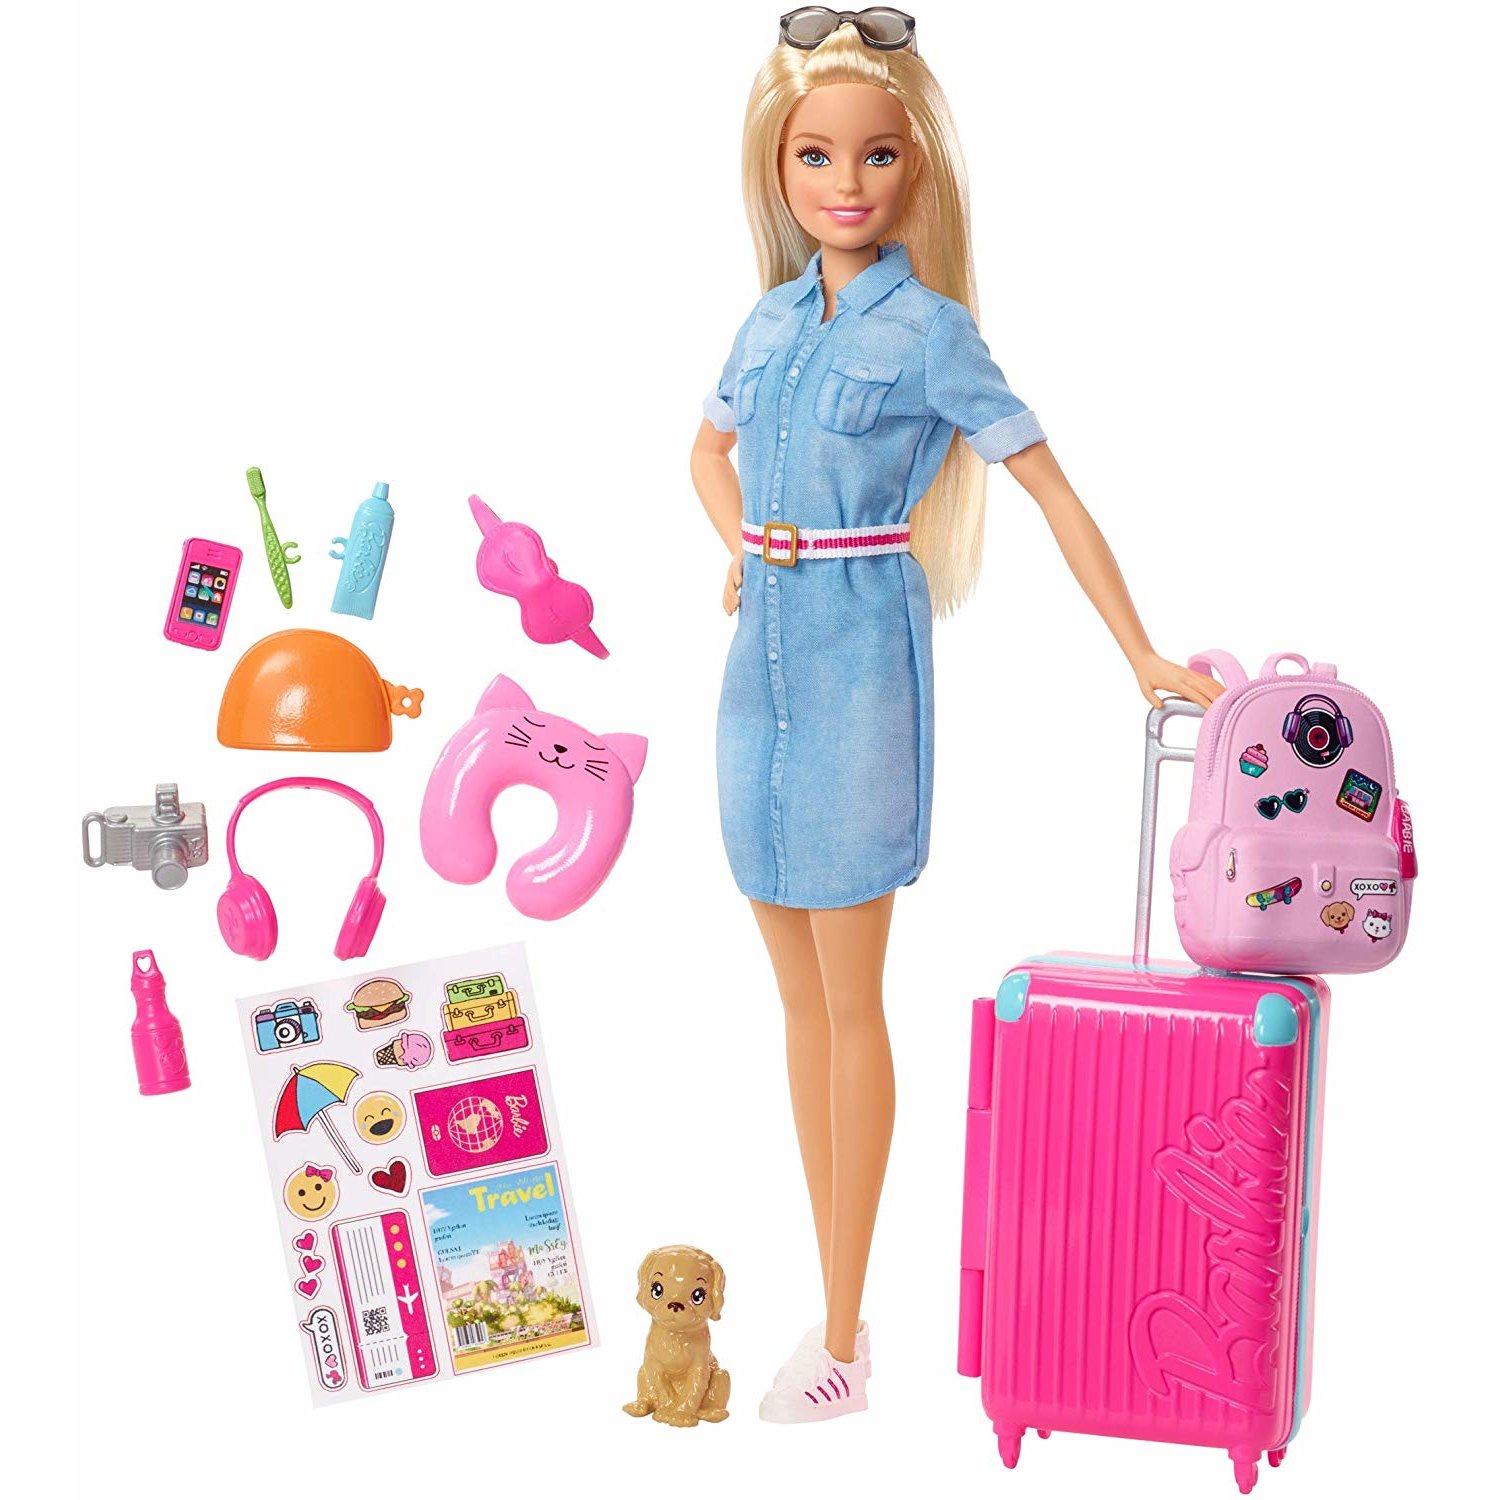 Barbie FWV25 Doll and Travel Set with Puppy